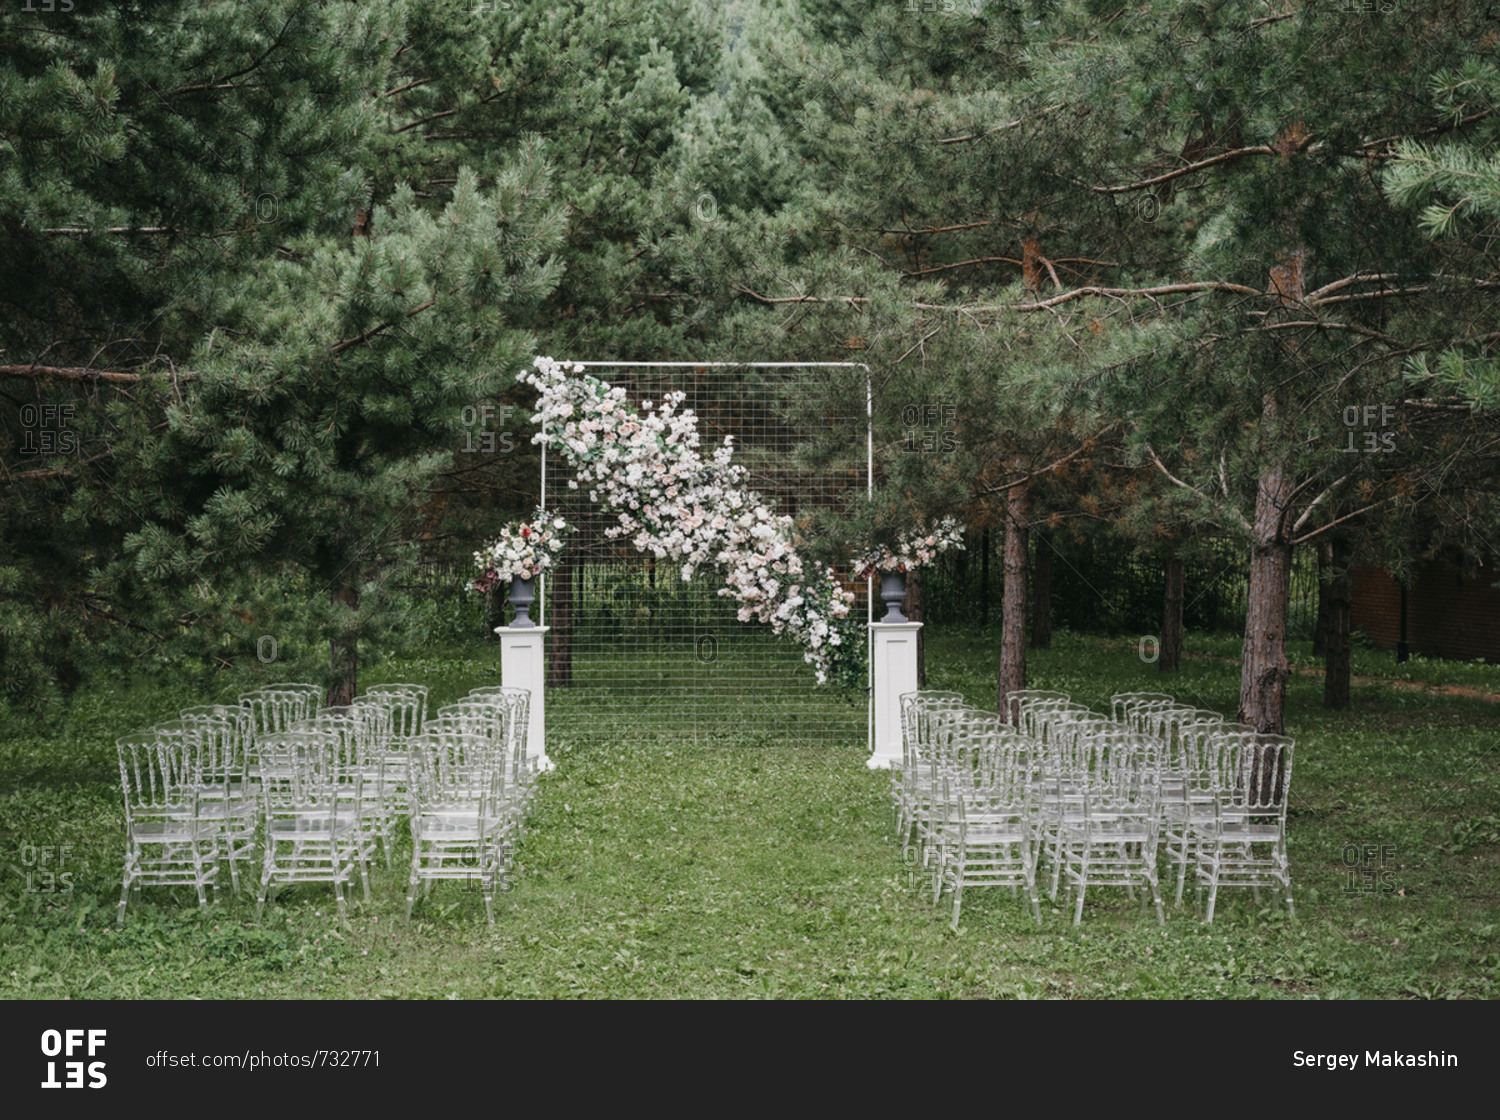 Floral backdrop and seats at an outdoor wedding ceremony